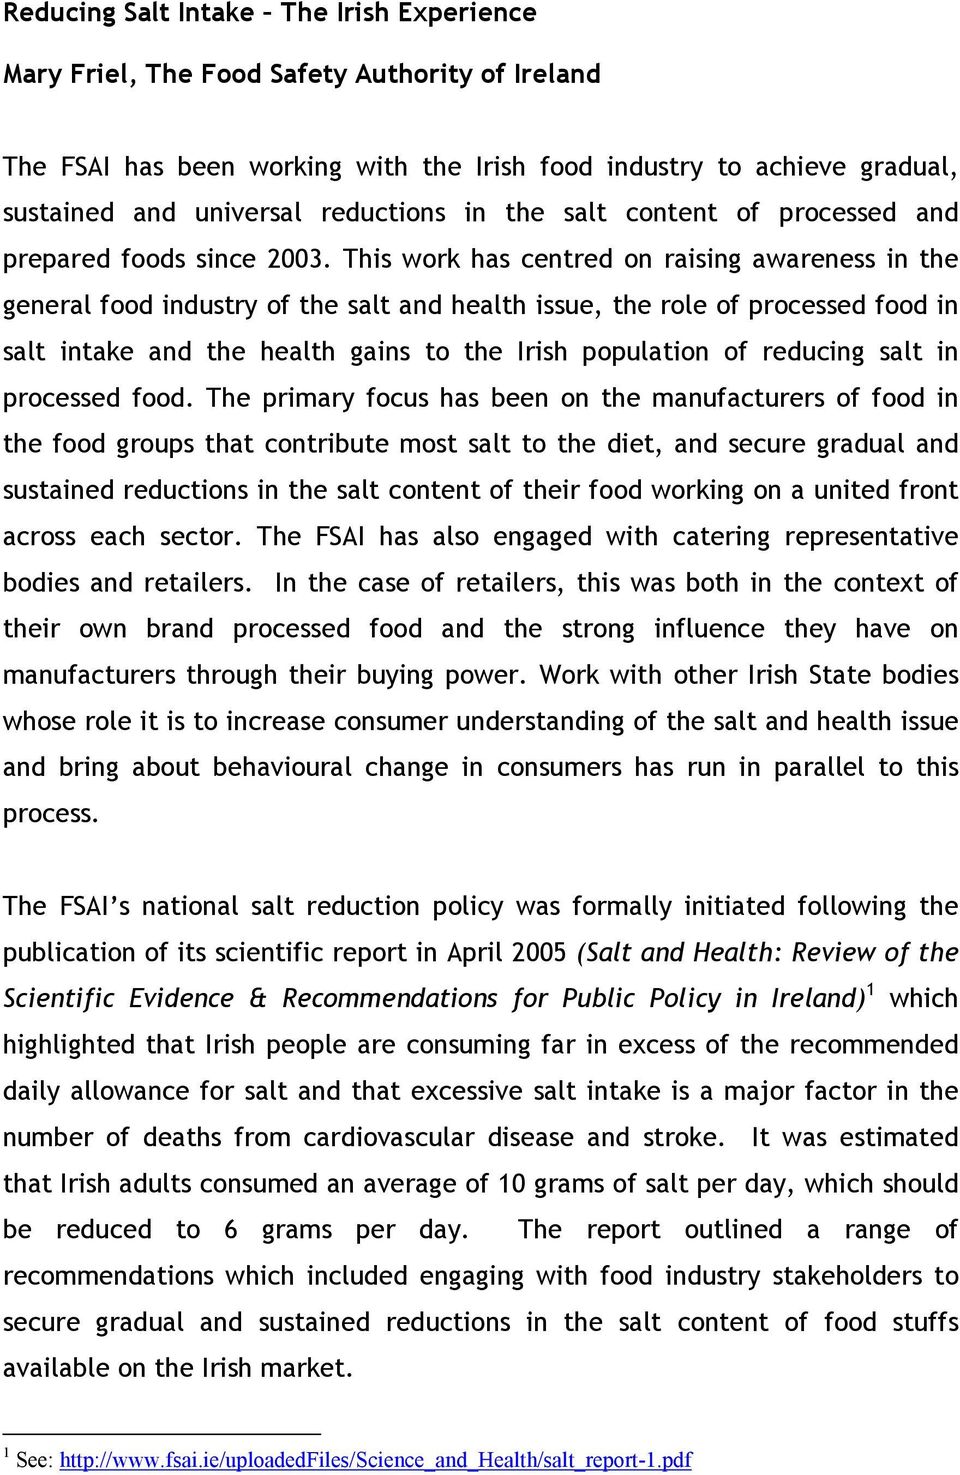 This work has centred on raising awareness in the general food industry of the salt and health issue, the role of processed food in salt intake and the health gains to the Irish population of